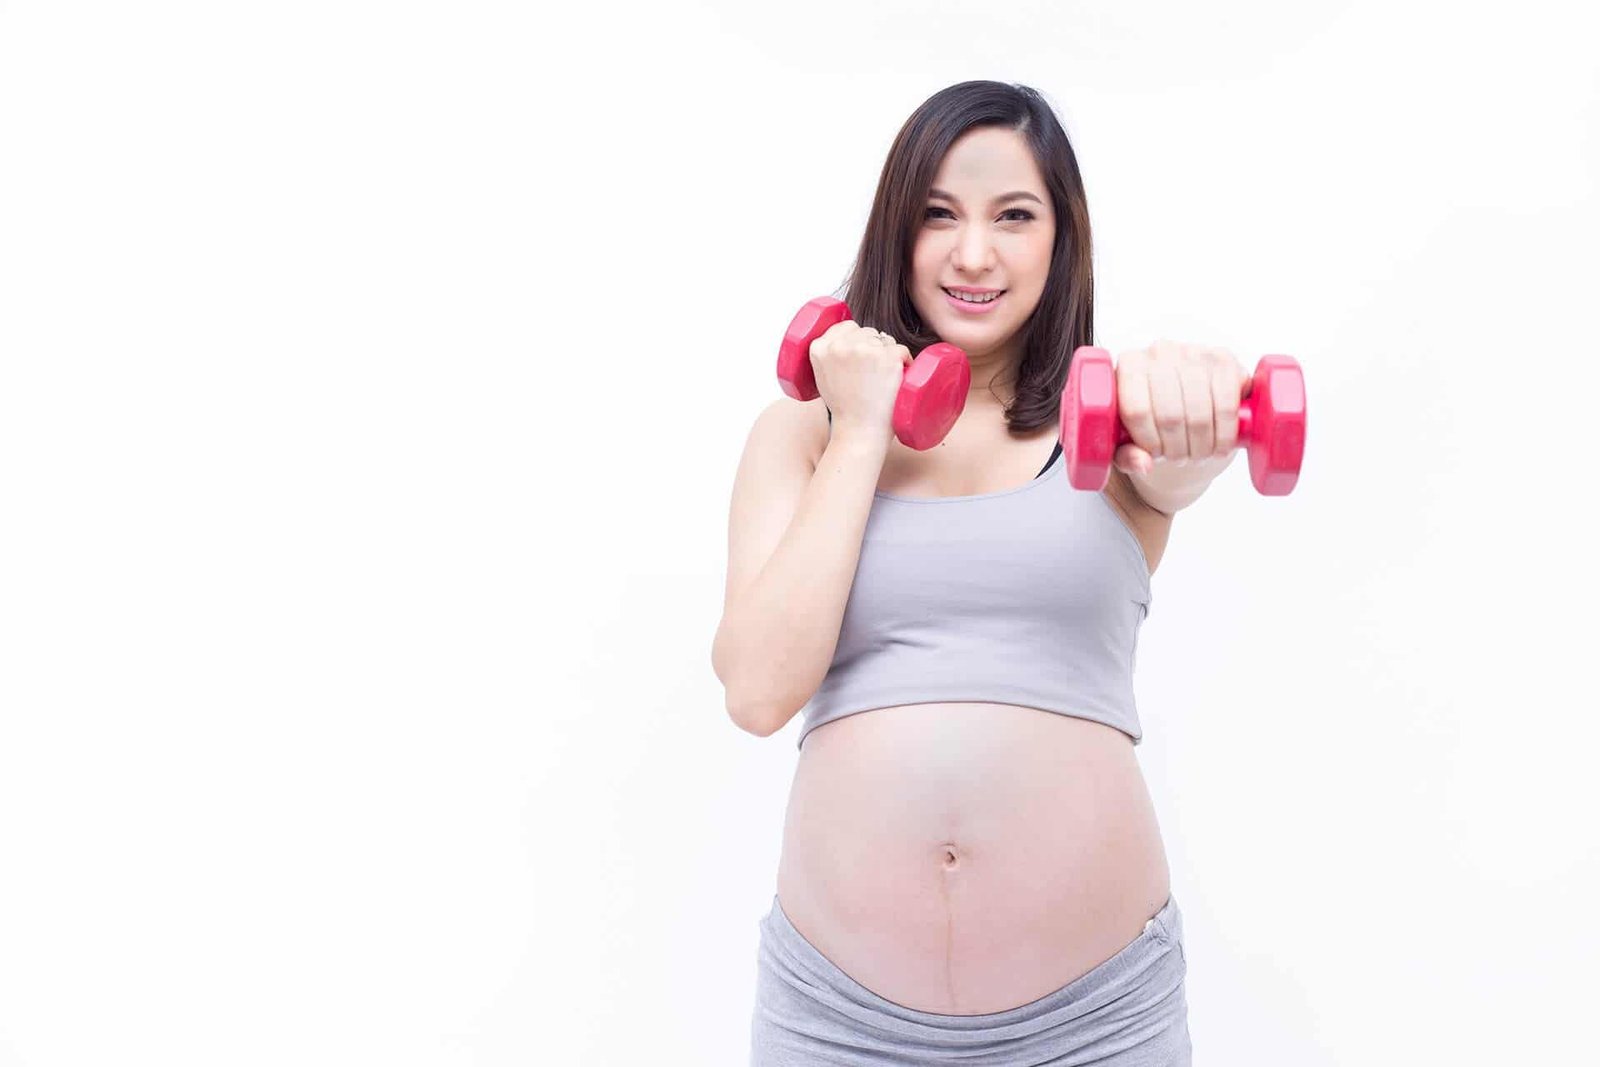 5 Top Workouts You Should Not Do While Pregnant